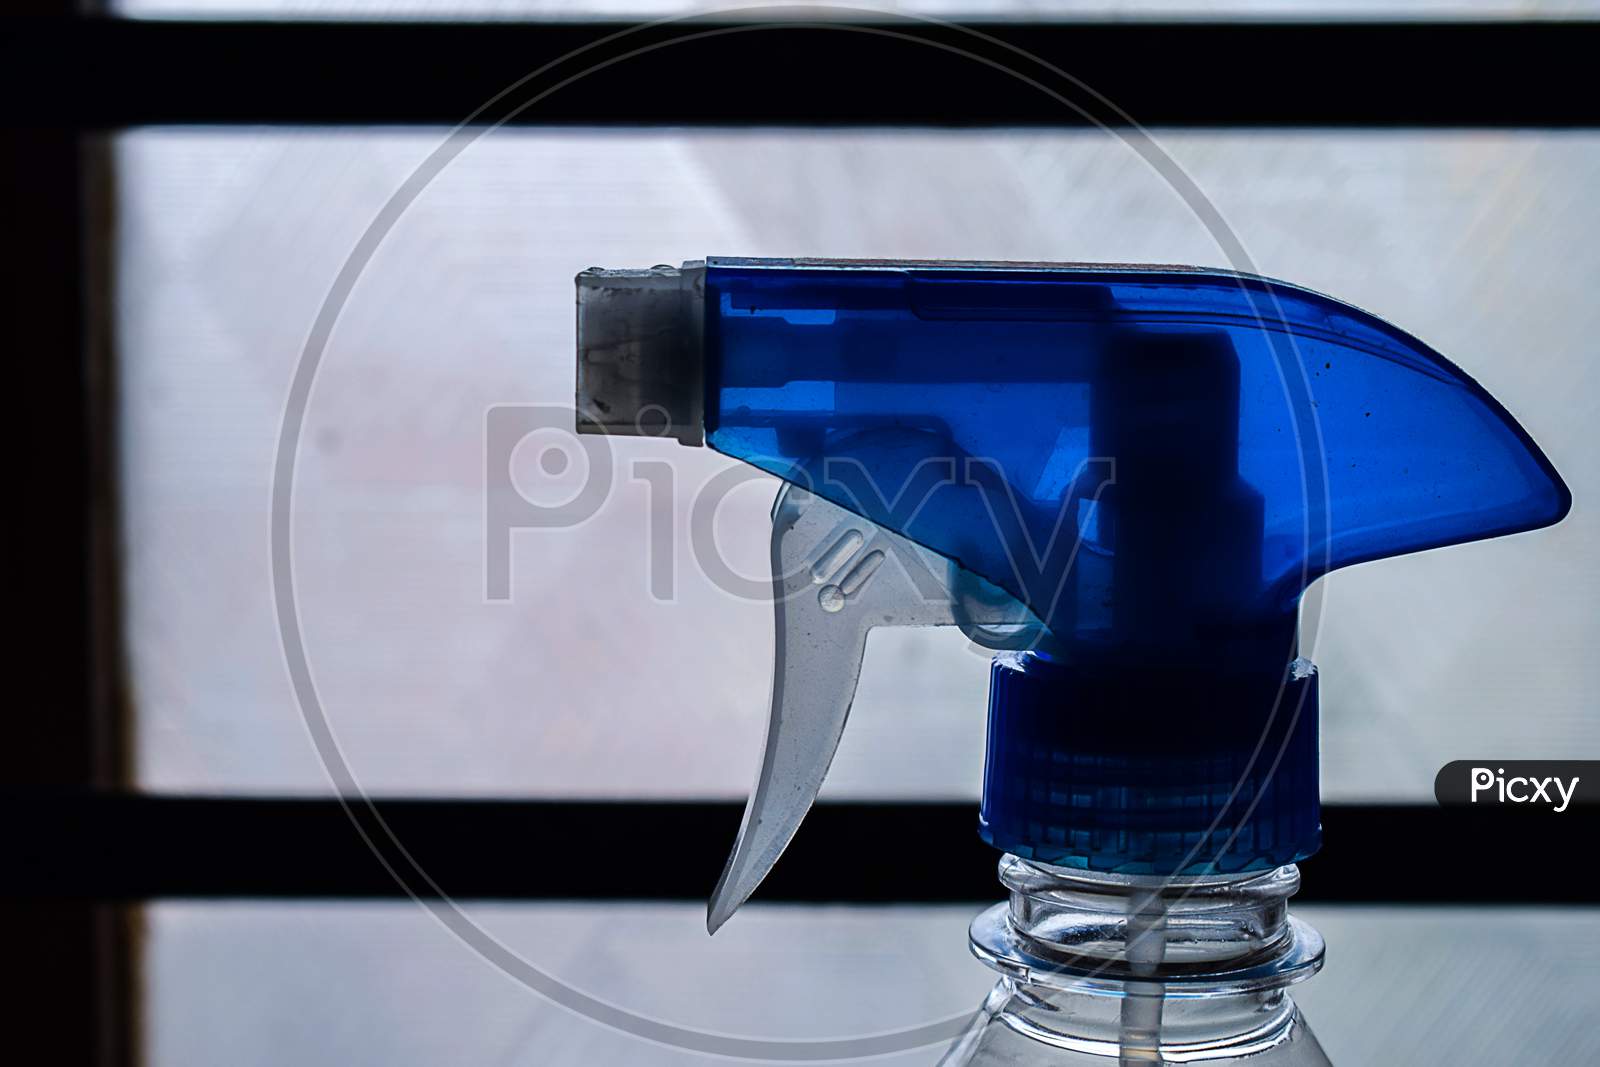 Stock Photo Of A Blue Color Trigger Pistol Spray Bottle Kept In Front Of Window Used For Cleaning Purpose At Home In Bangalore City Karnataka India